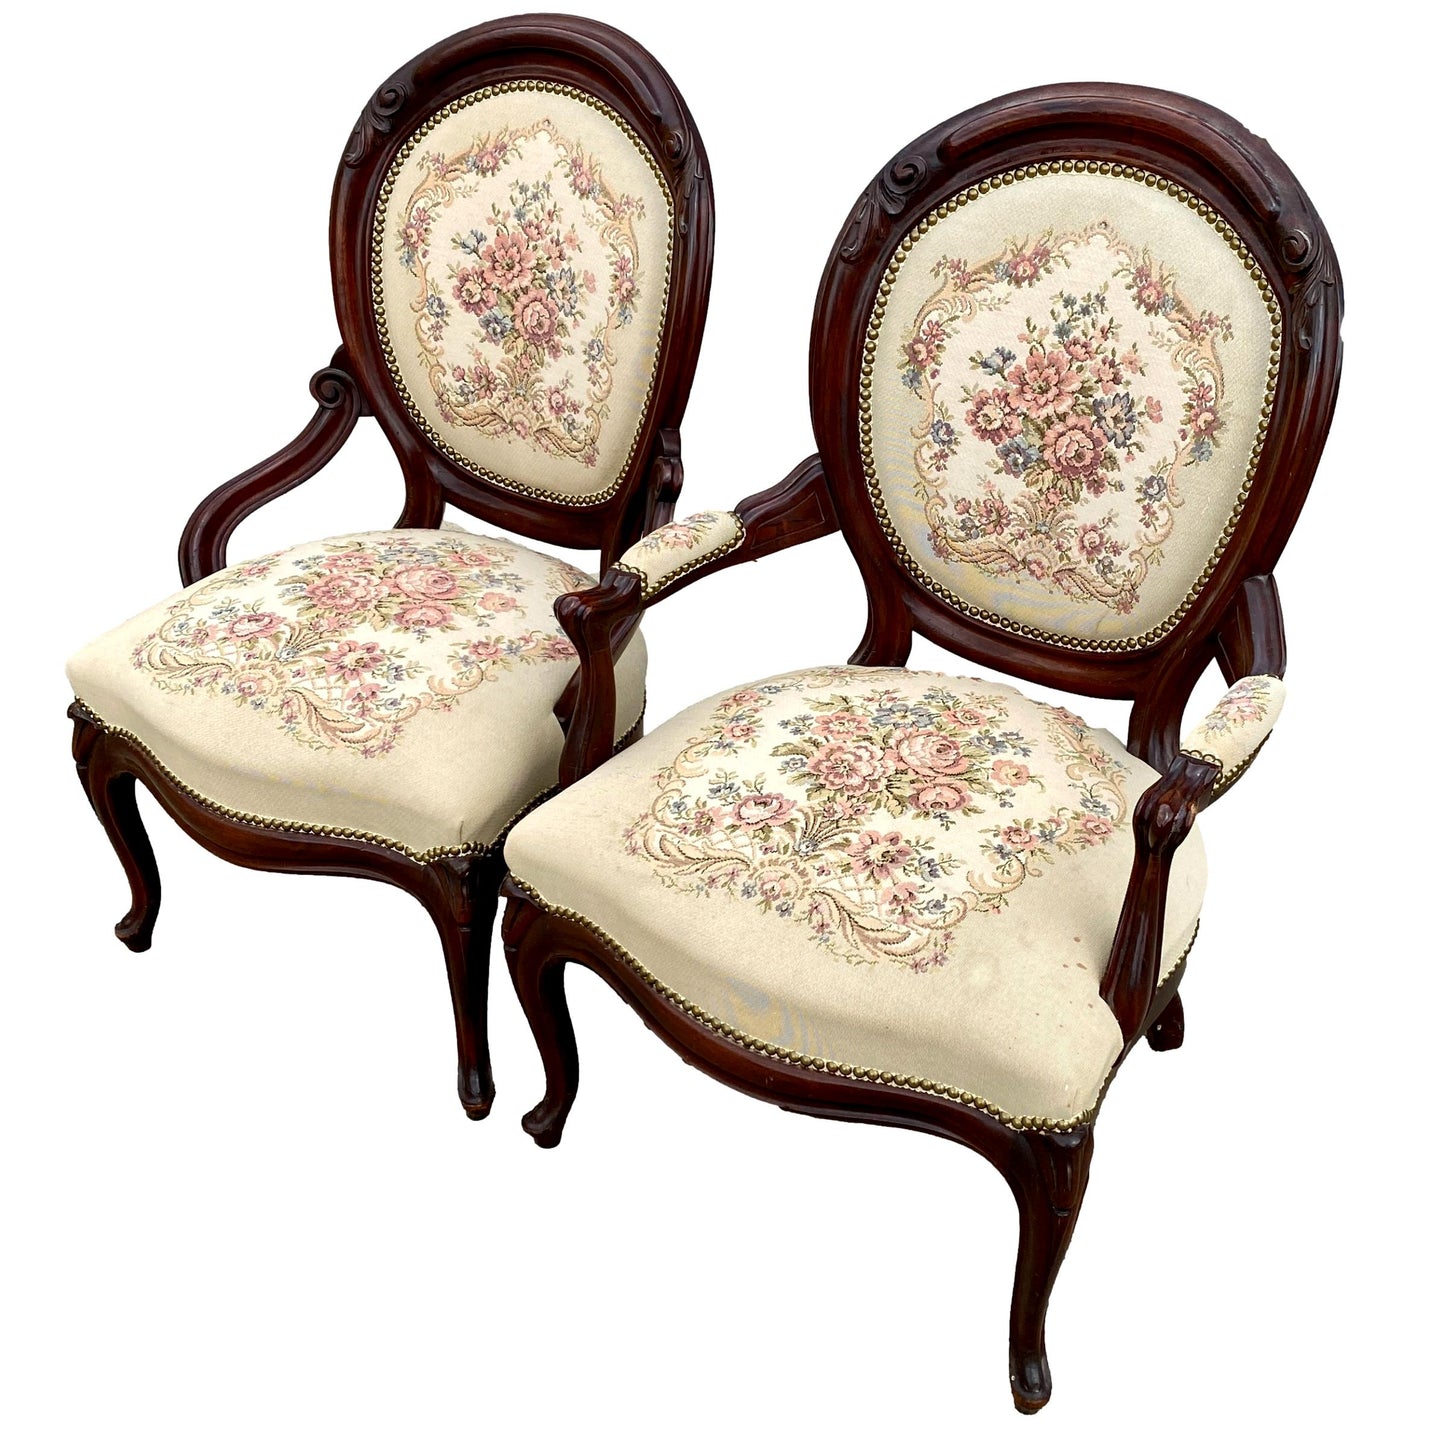 Pair of Floral Tapestry Chairs